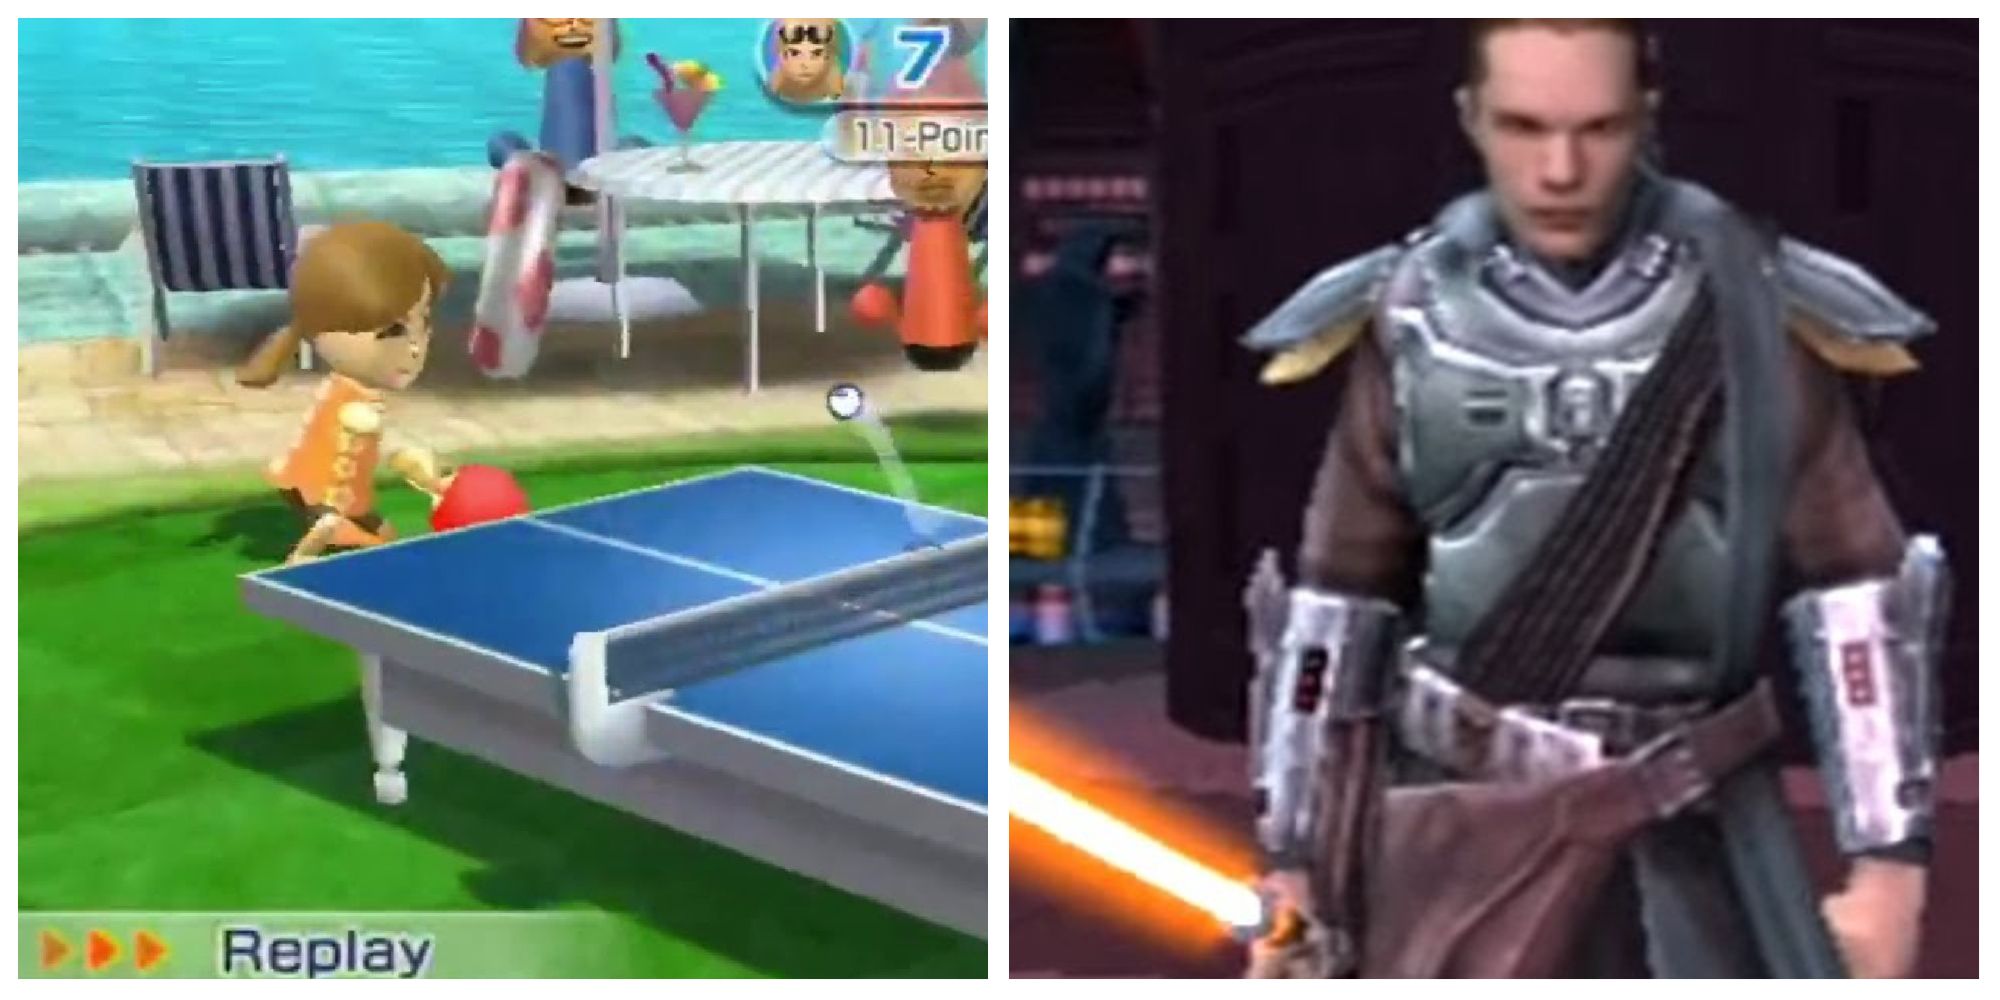 Left: Table Tennis from Wii Sports Resort: Right: Starkiller from Star Wars: The Force Unleashed. Image Sources: GameZXC.com and reddit.com